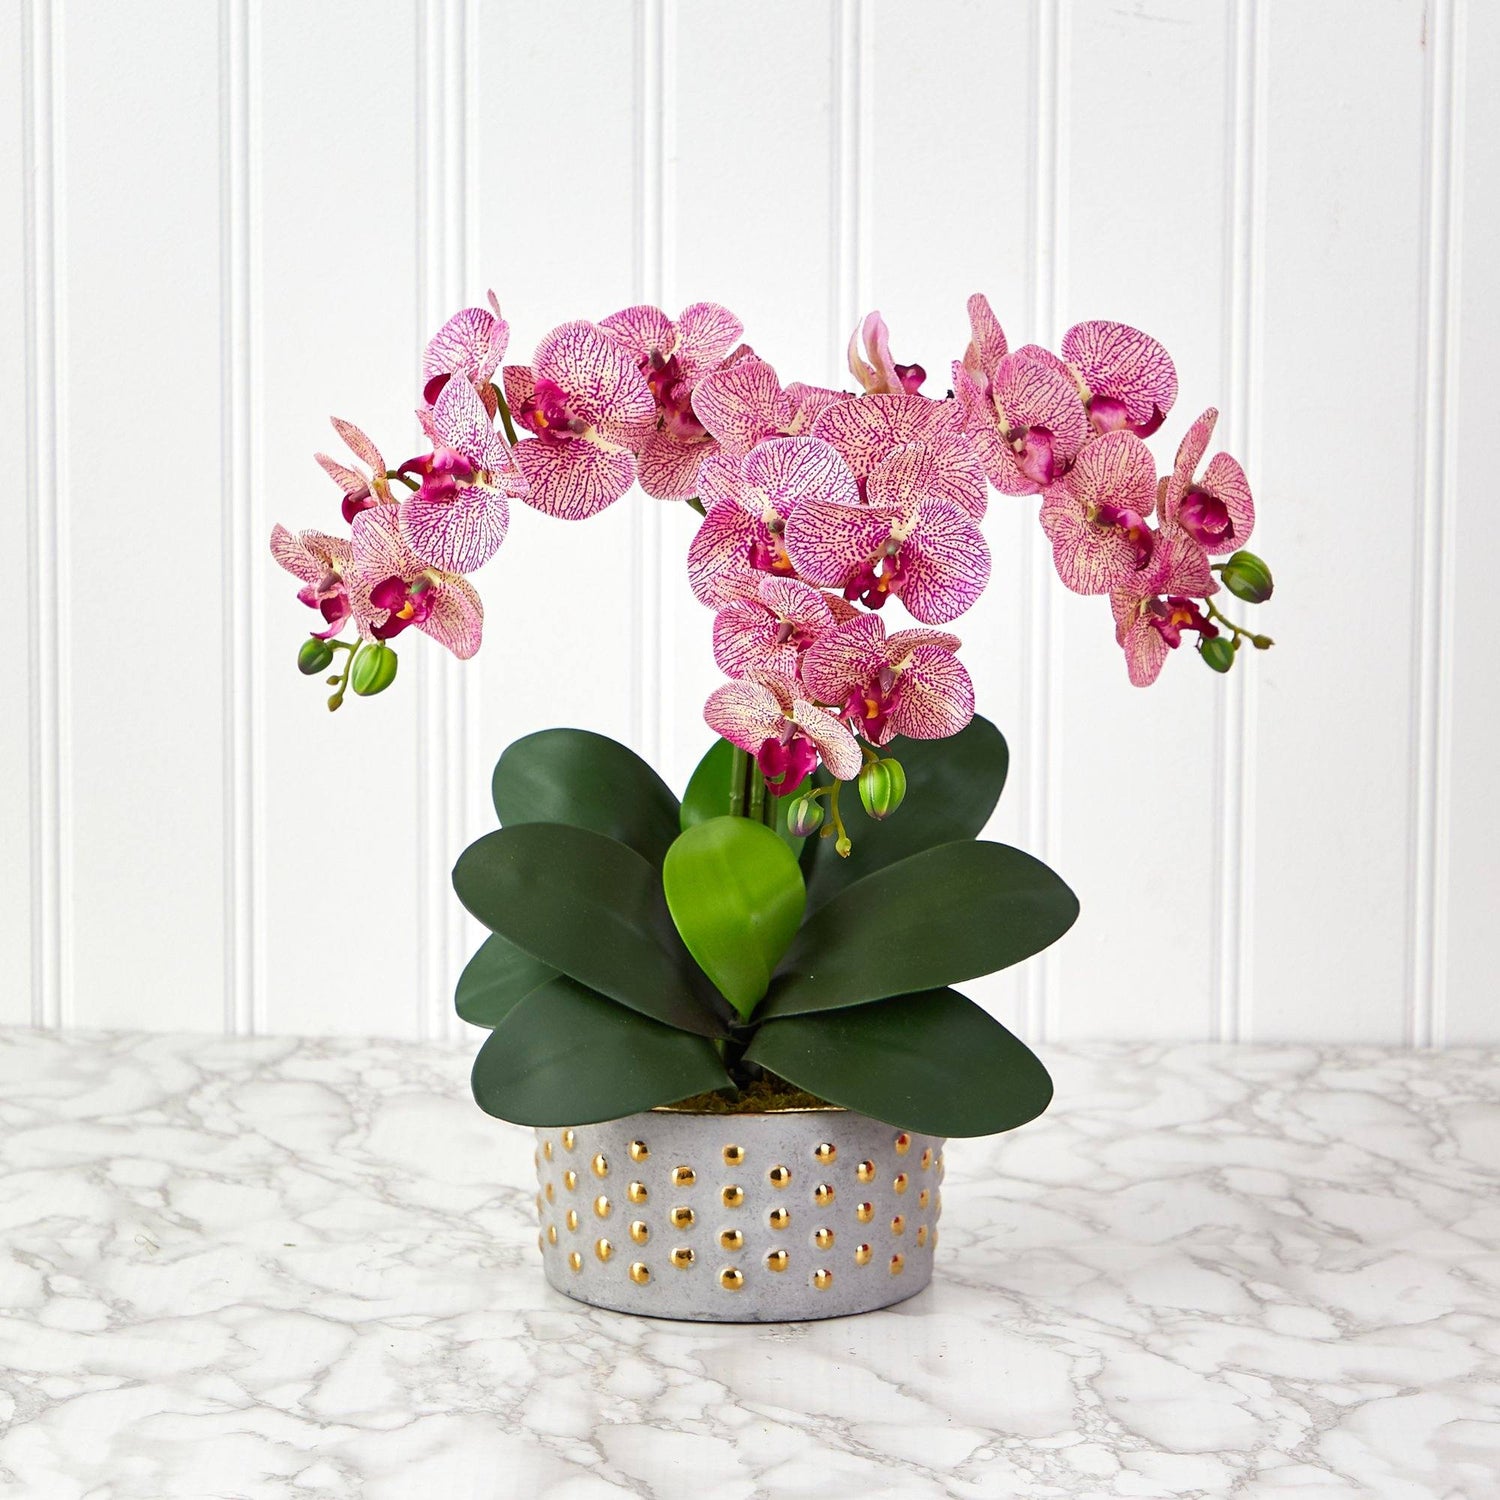 17” Phalaenopsis Orchid Artificial Arrangement in Bowl with Gold Trimming